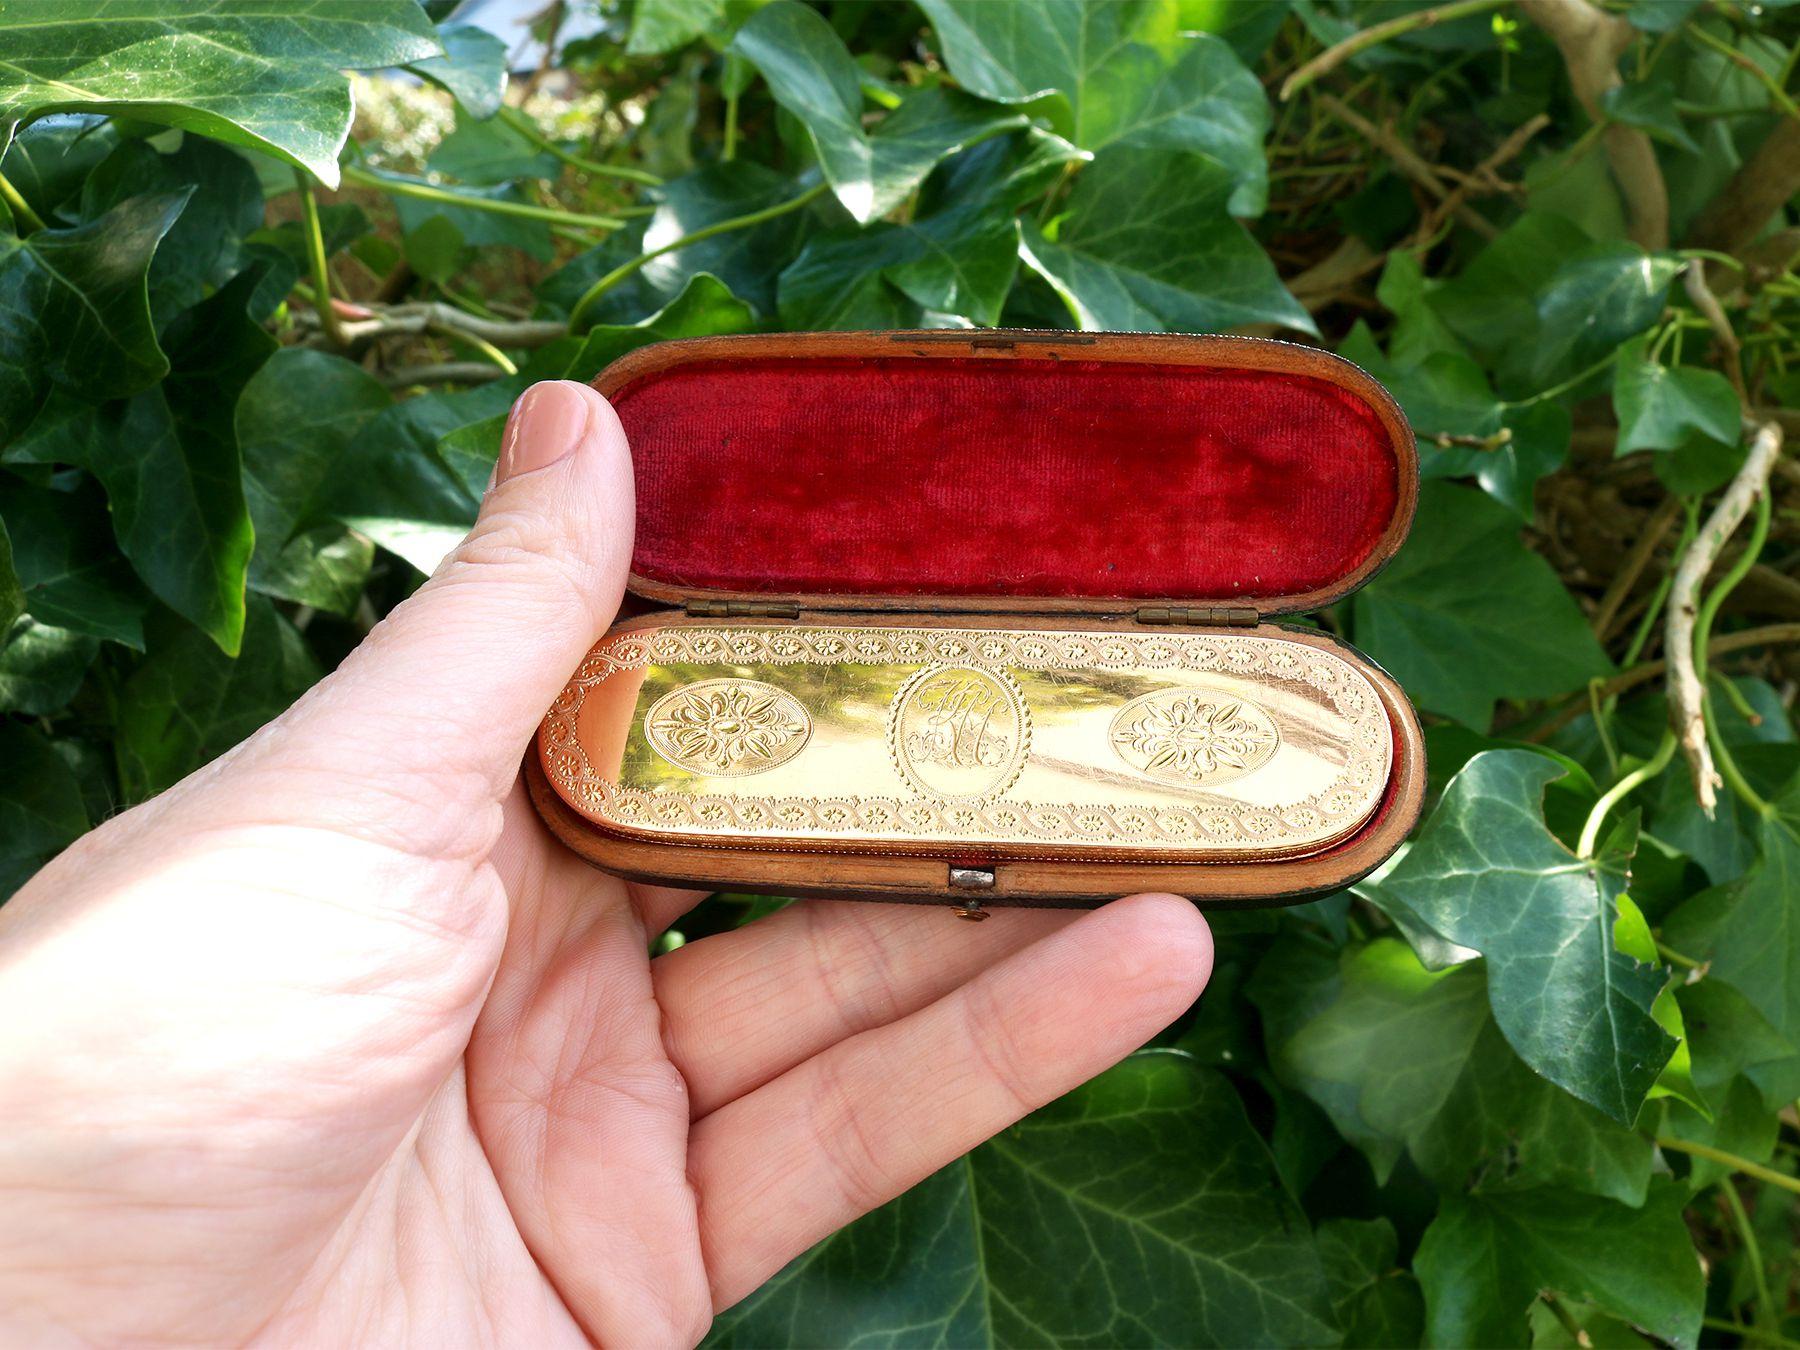 An exceptional, fine and impressive antique Georgian English 22k yellow gold toothpick case / holder with mirror - boxed; an addition to our ornamental silverware collection.

This exceptional antique Georgian 22k yellow gold toothpick holder has an